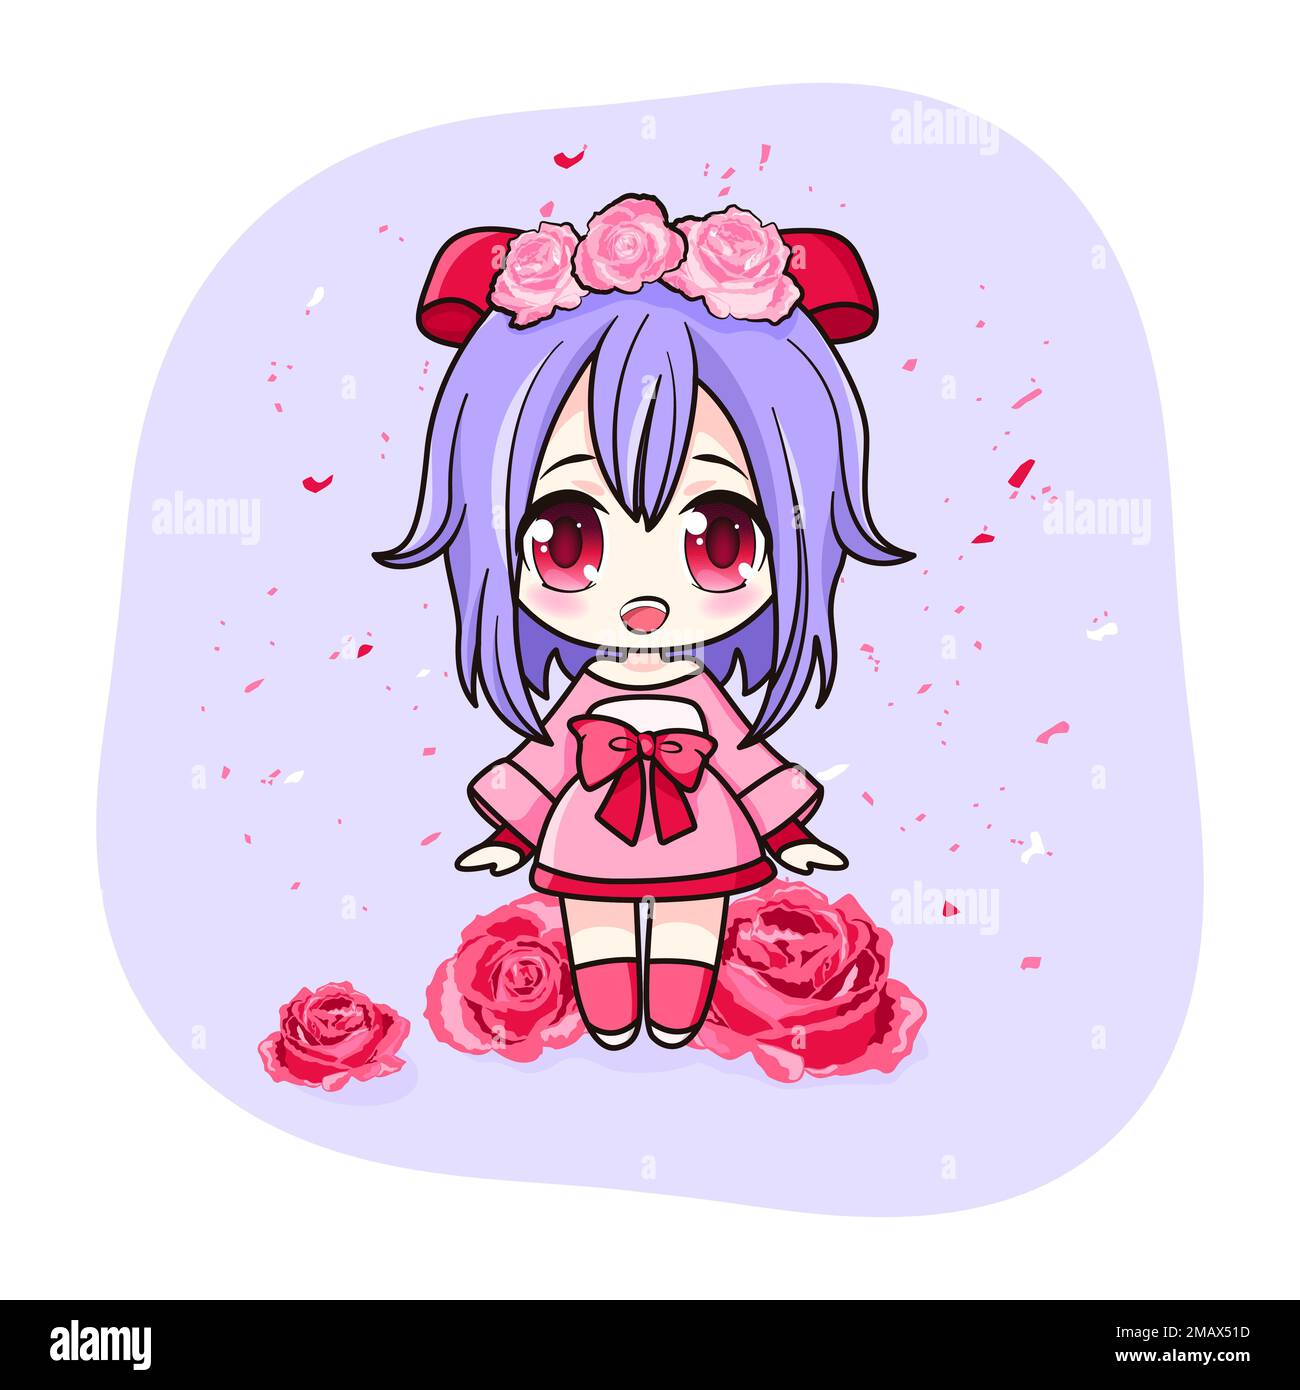 Cute and kawaii girl with red roses. Manga chibi with flowers. Stock Vector